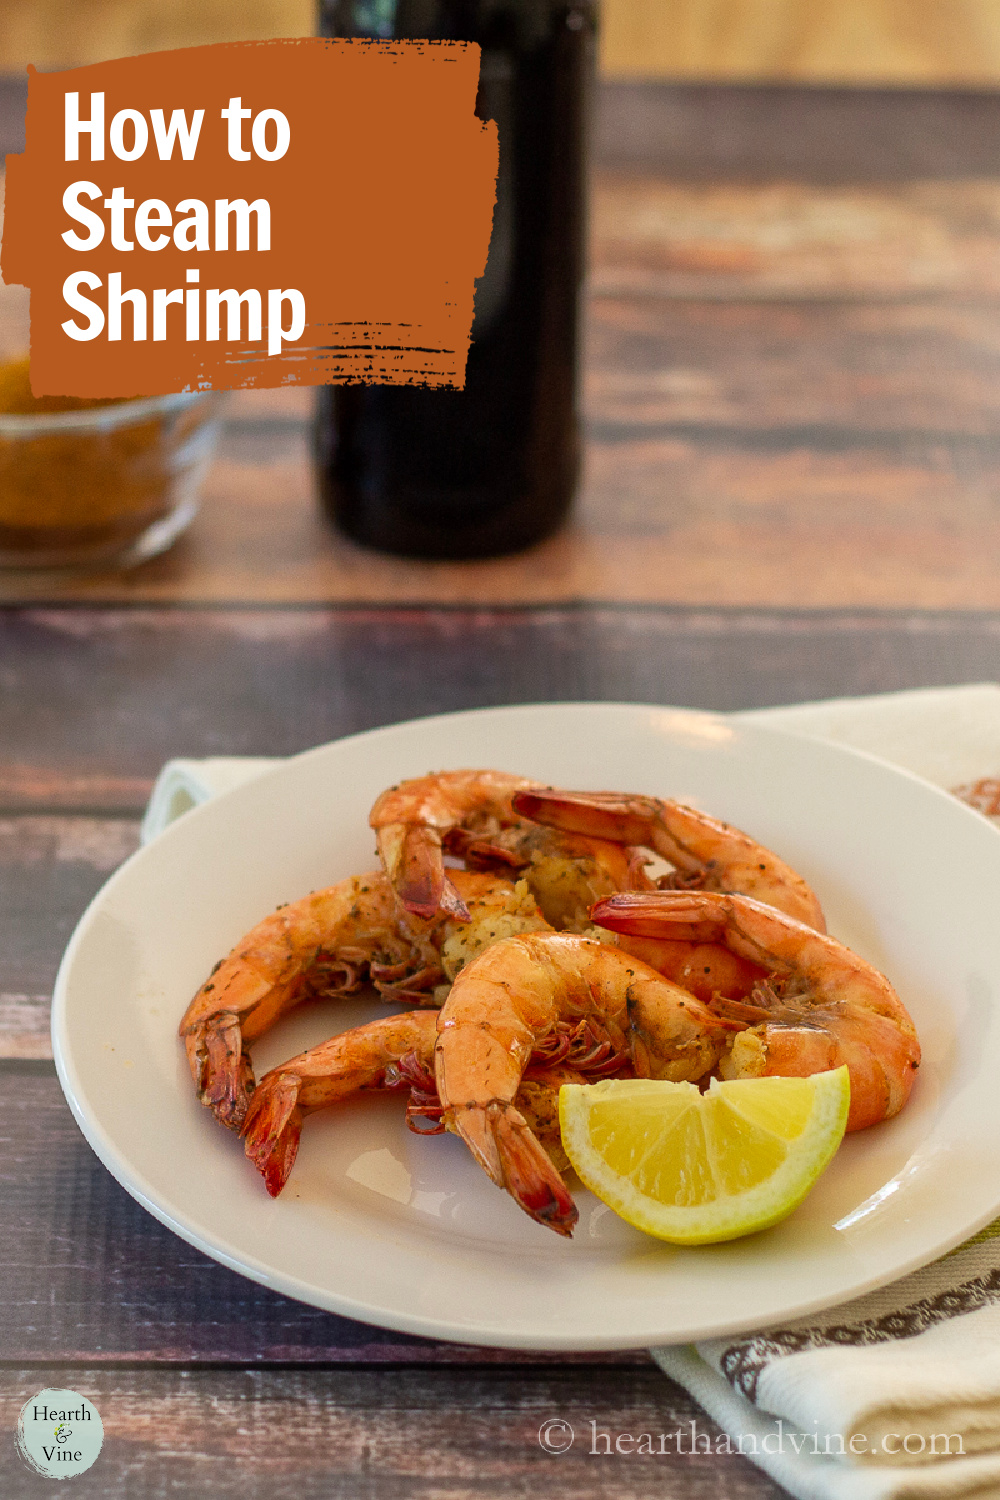 Plate with a lemon wedge and steamed shrimp